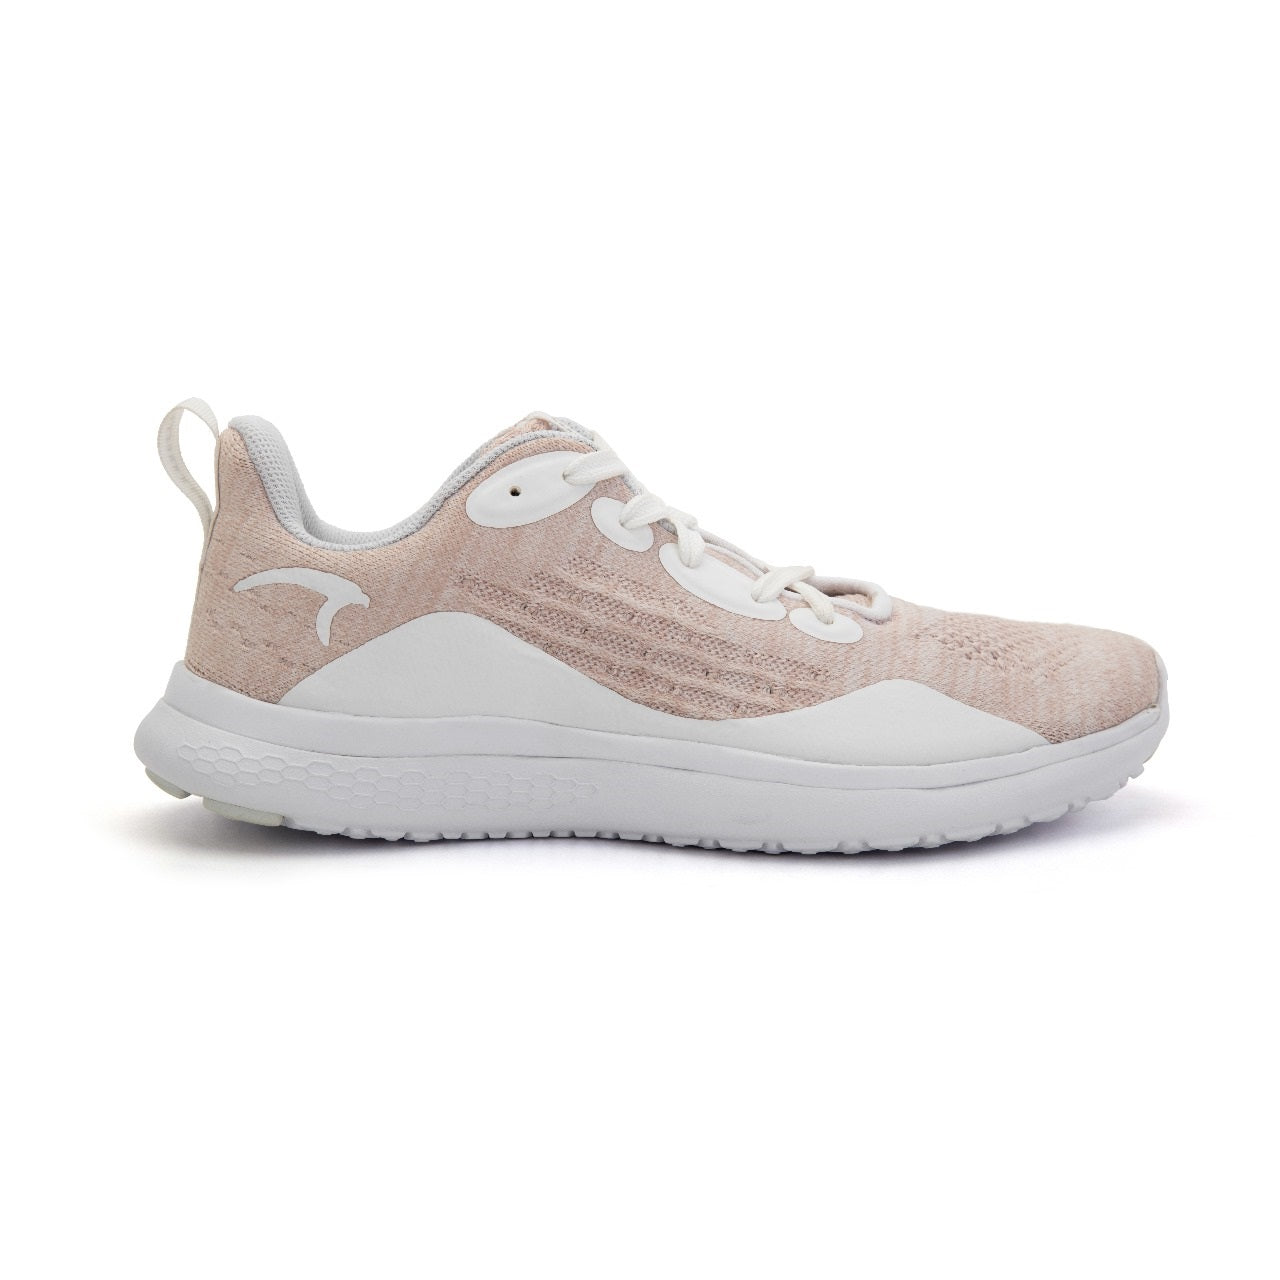 Mintra Stride Running Shoes For Women, Rose & White